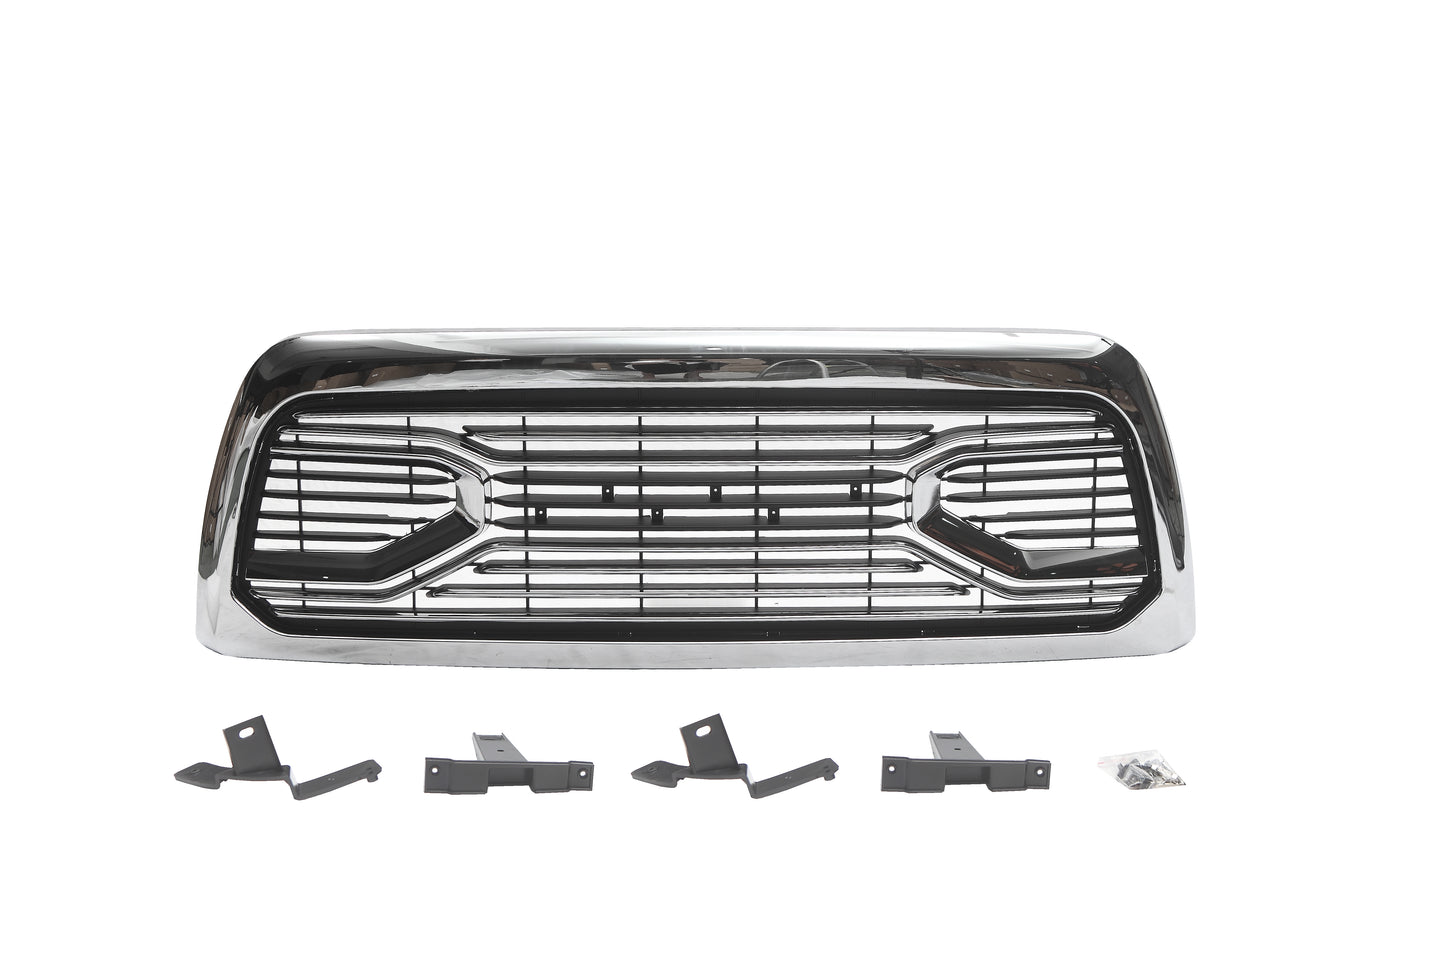 Goodmatchup Front Grille For 2013 2014 2015 2016 2017 2018 Dodge RAM 2500 3500 Chrome Grill Big Horn Style With Letters W/LED Lights